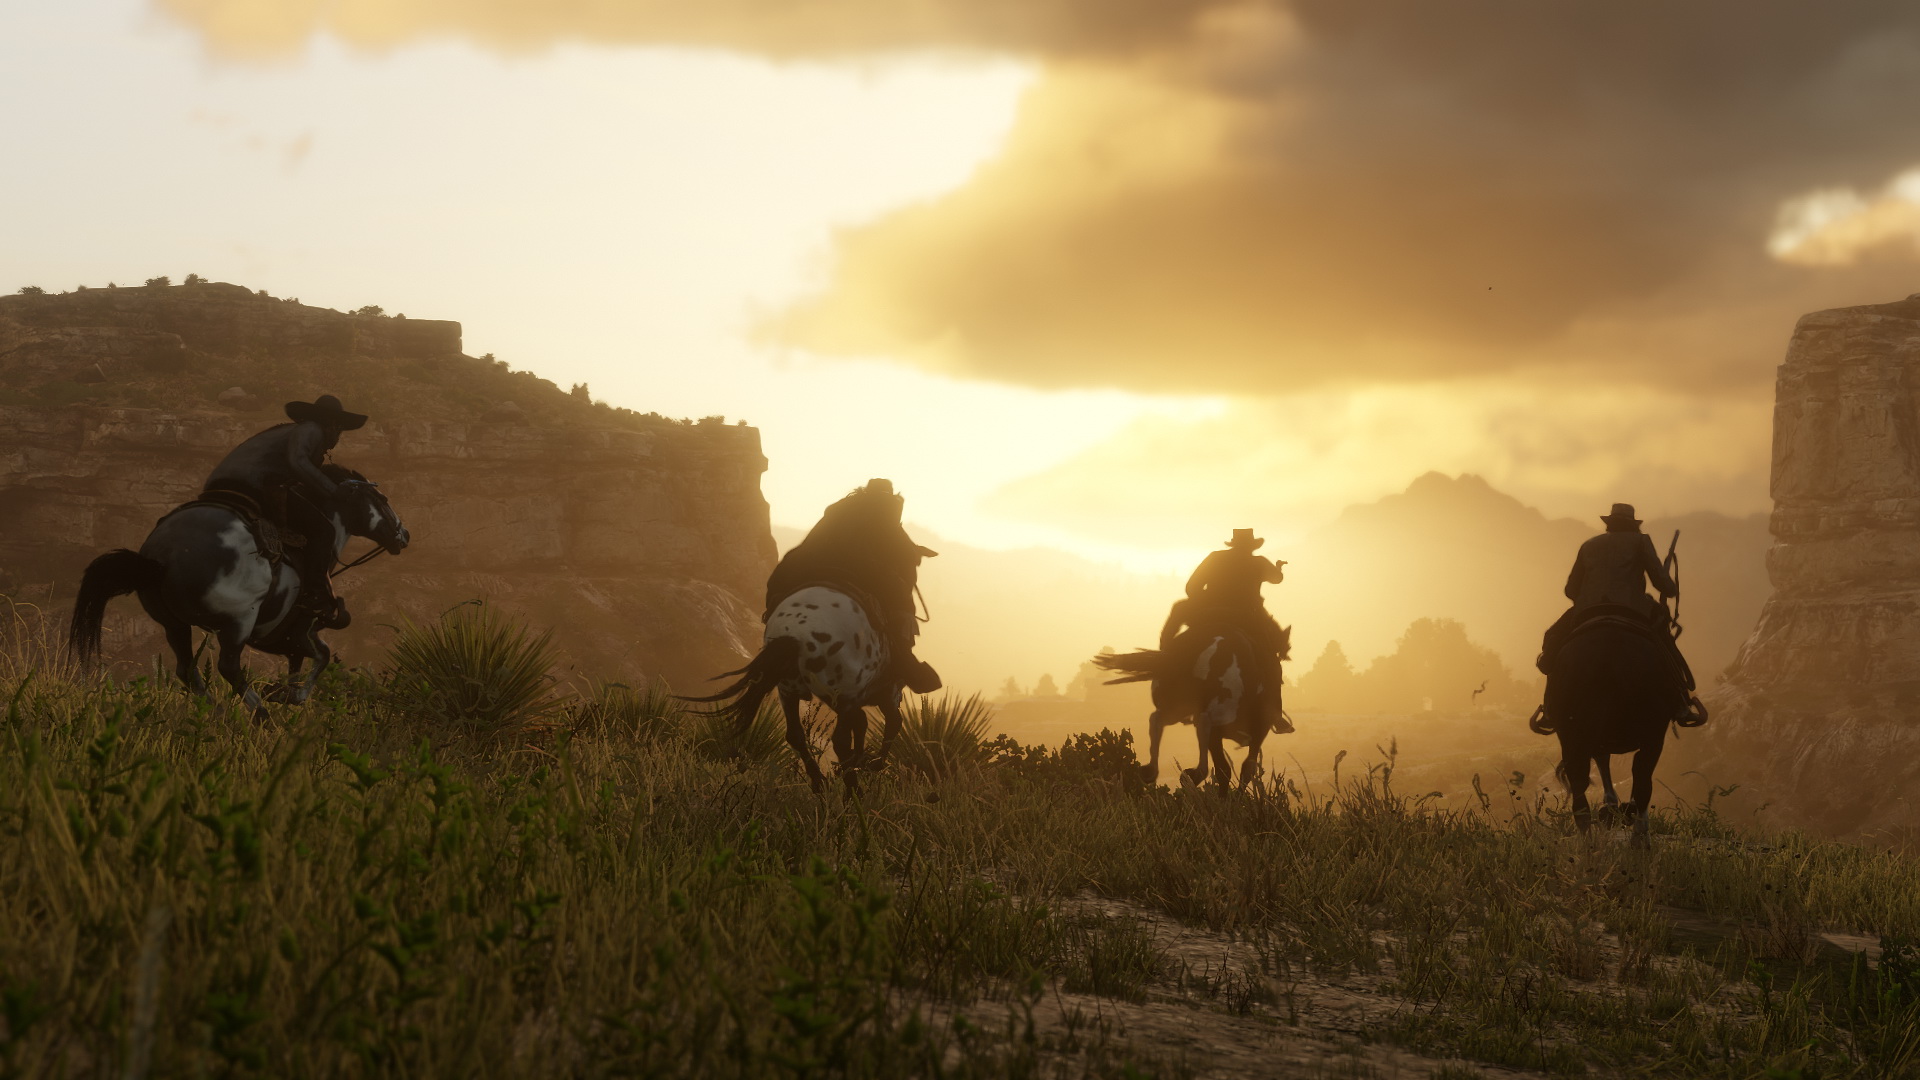 Red Dead Redemption 2 is Almost Guaranteed for PS5, Xbox Series X